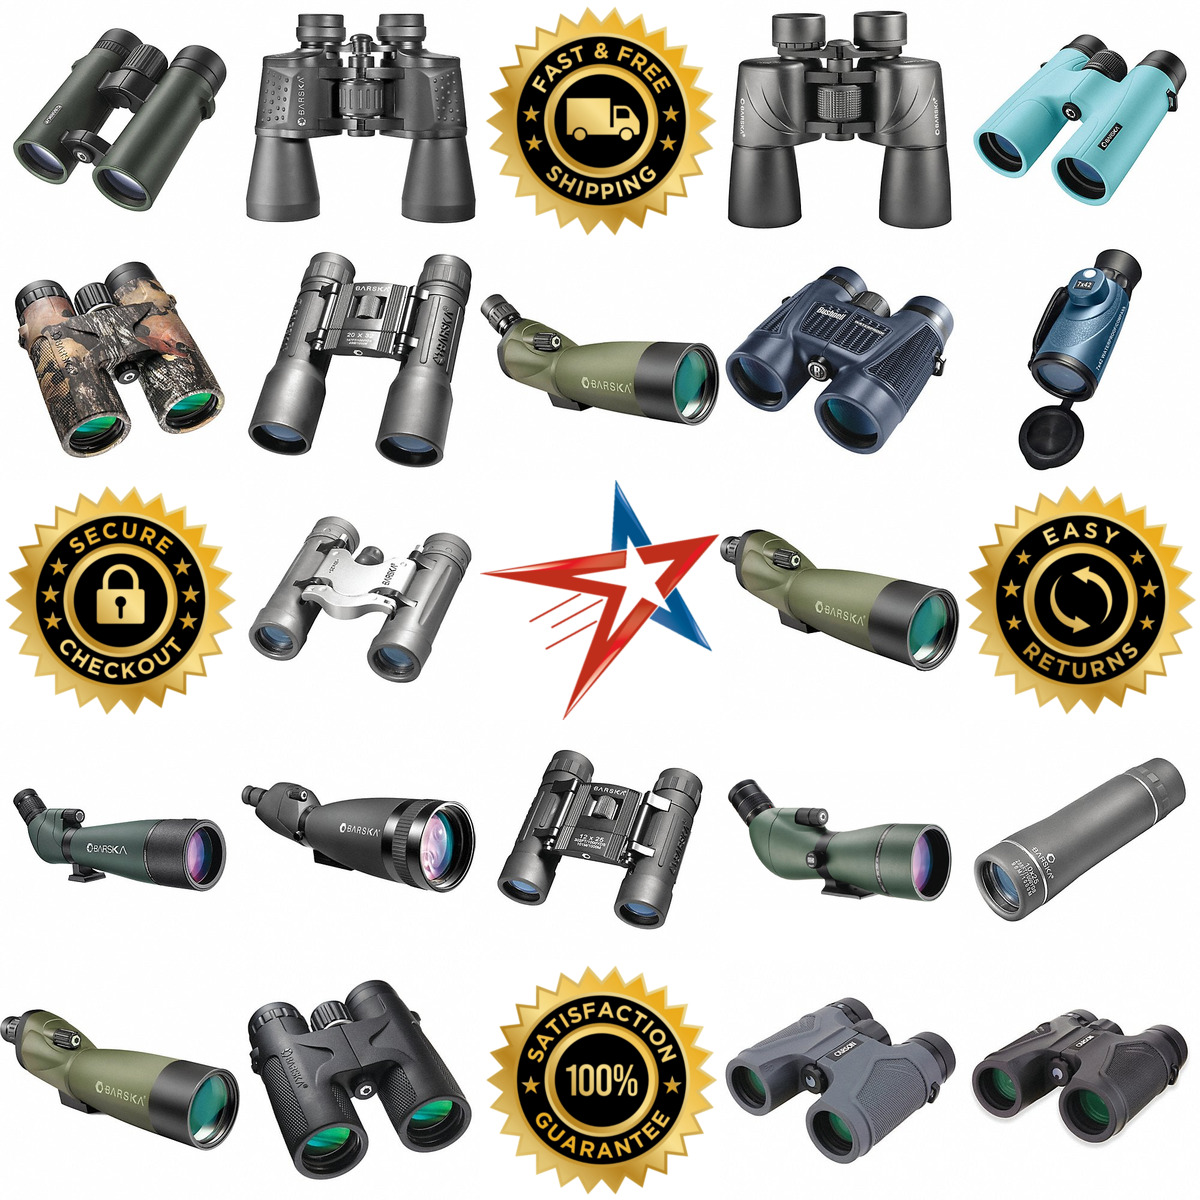 A selection of Binoculars products on GoVets